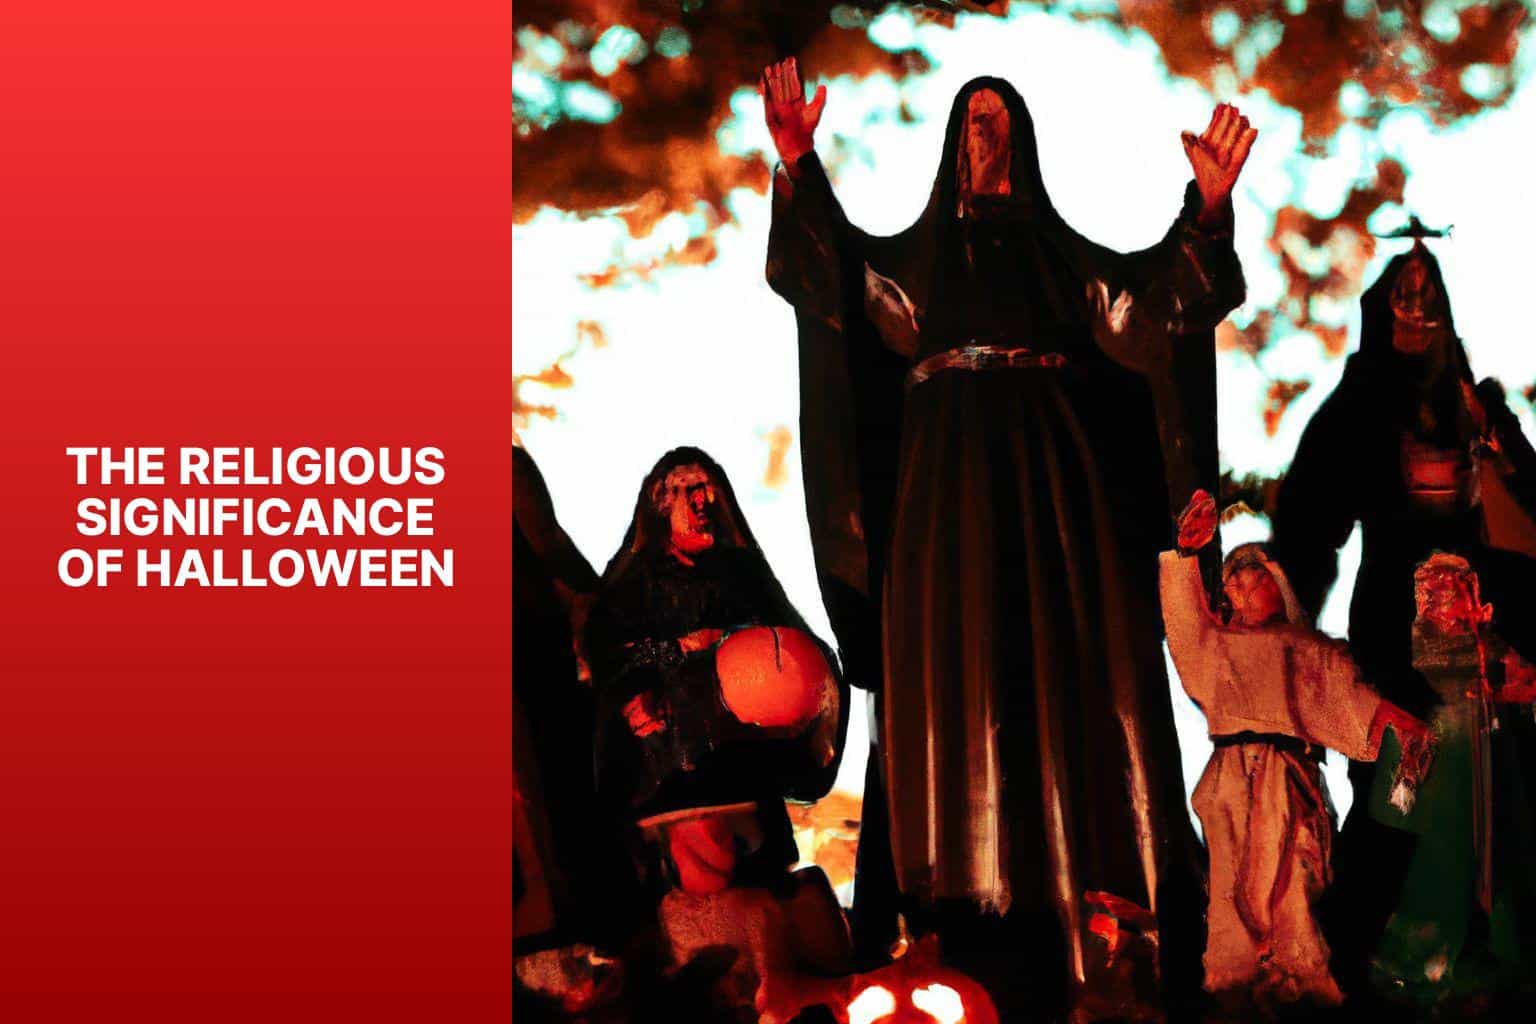 The Religious Significance of Halloween - is halloween satan